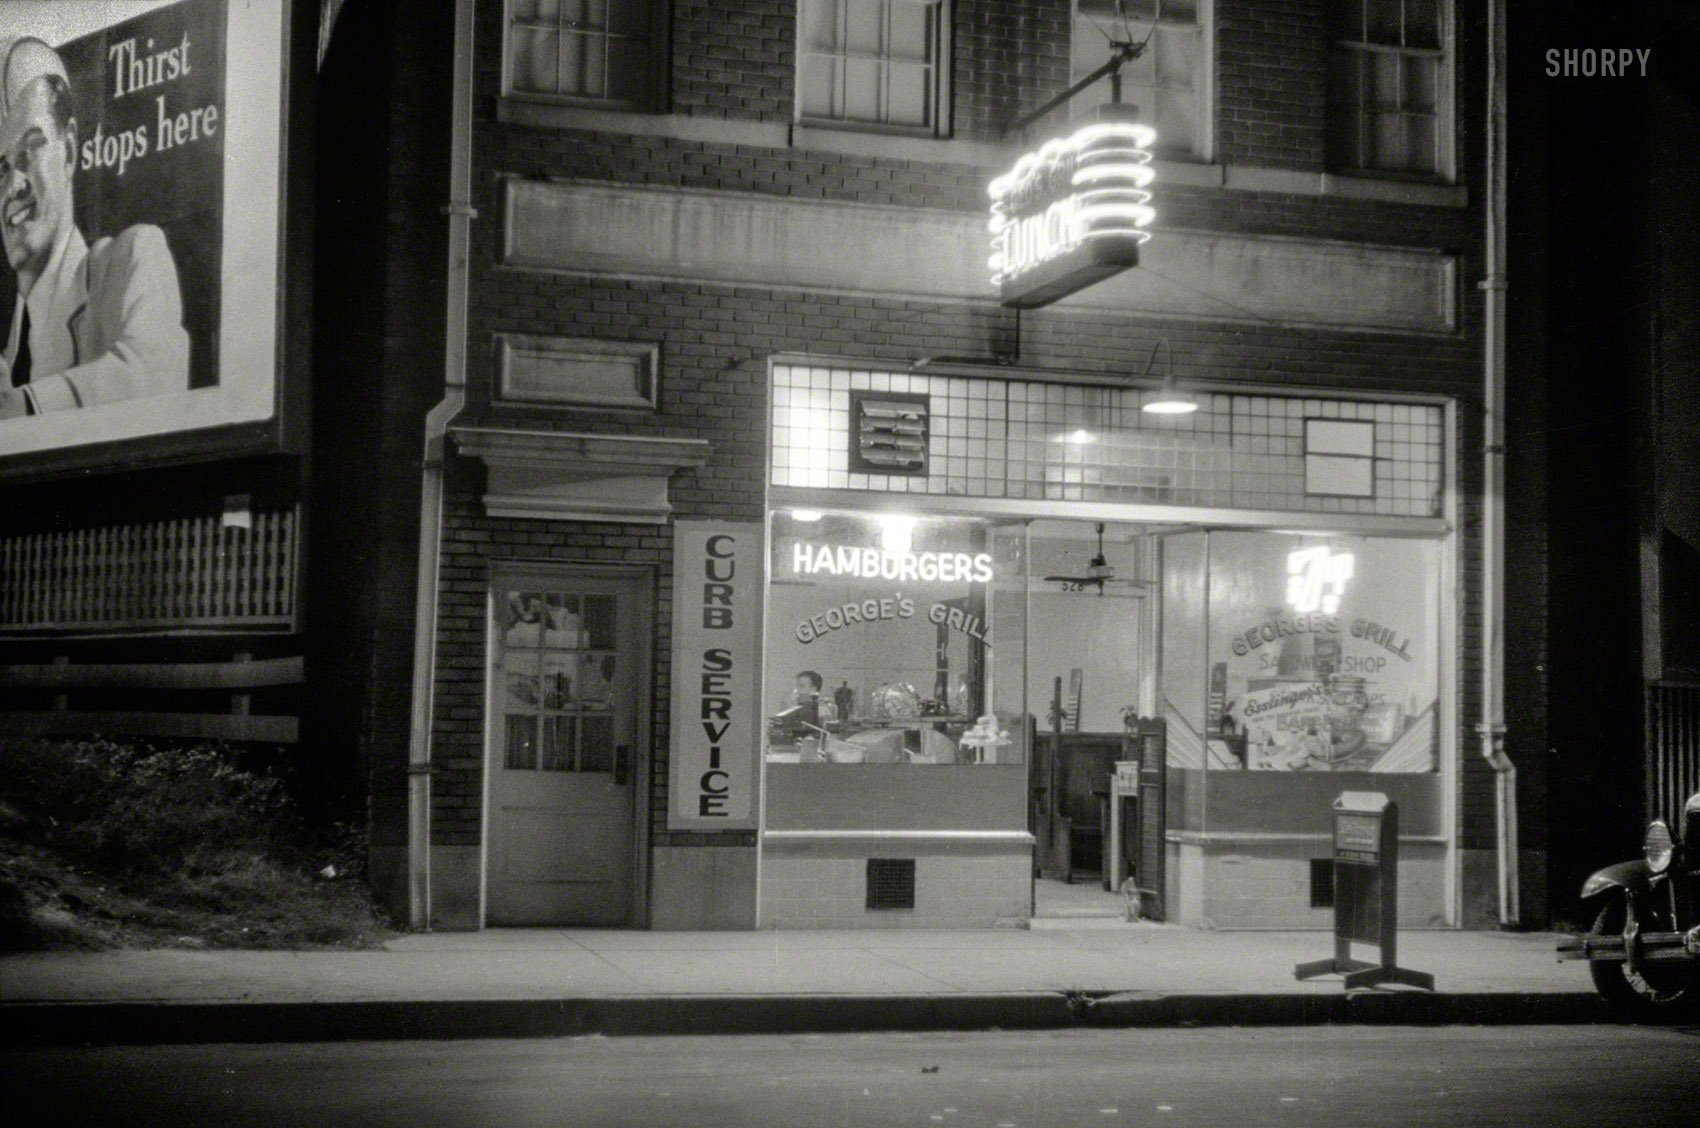 May 1940. "A hamburger shop in Durham, North Carolina." George's Grill, open all night. 35mm nitrate negative by Jack Delano. View full size.